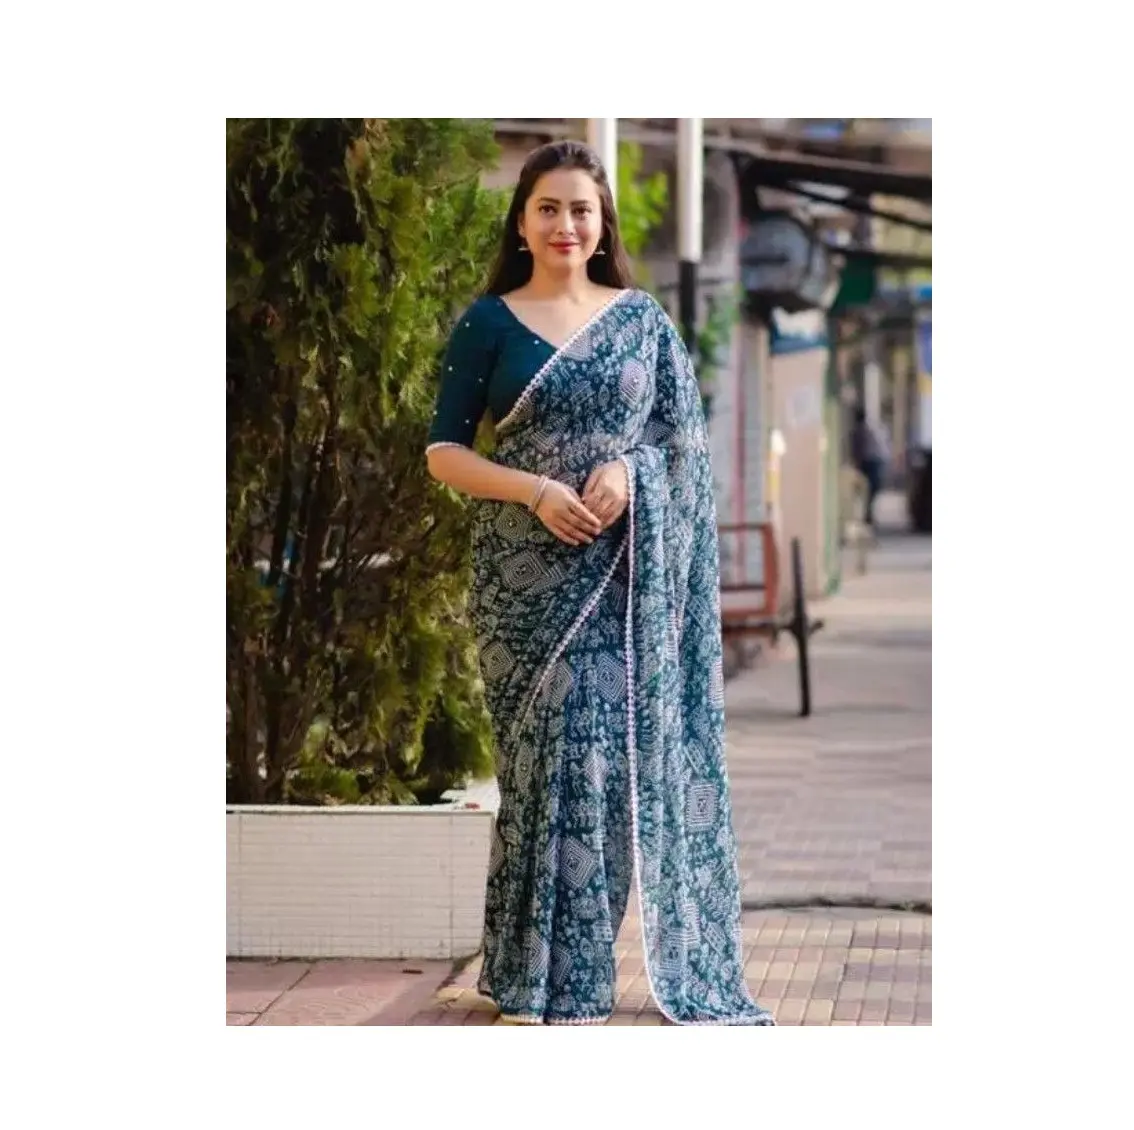 FULPARI Top Selling Georgette Fabric Full Printed Womens Sarees with GPO Lase Border and Full Mirror Work Blouse from India